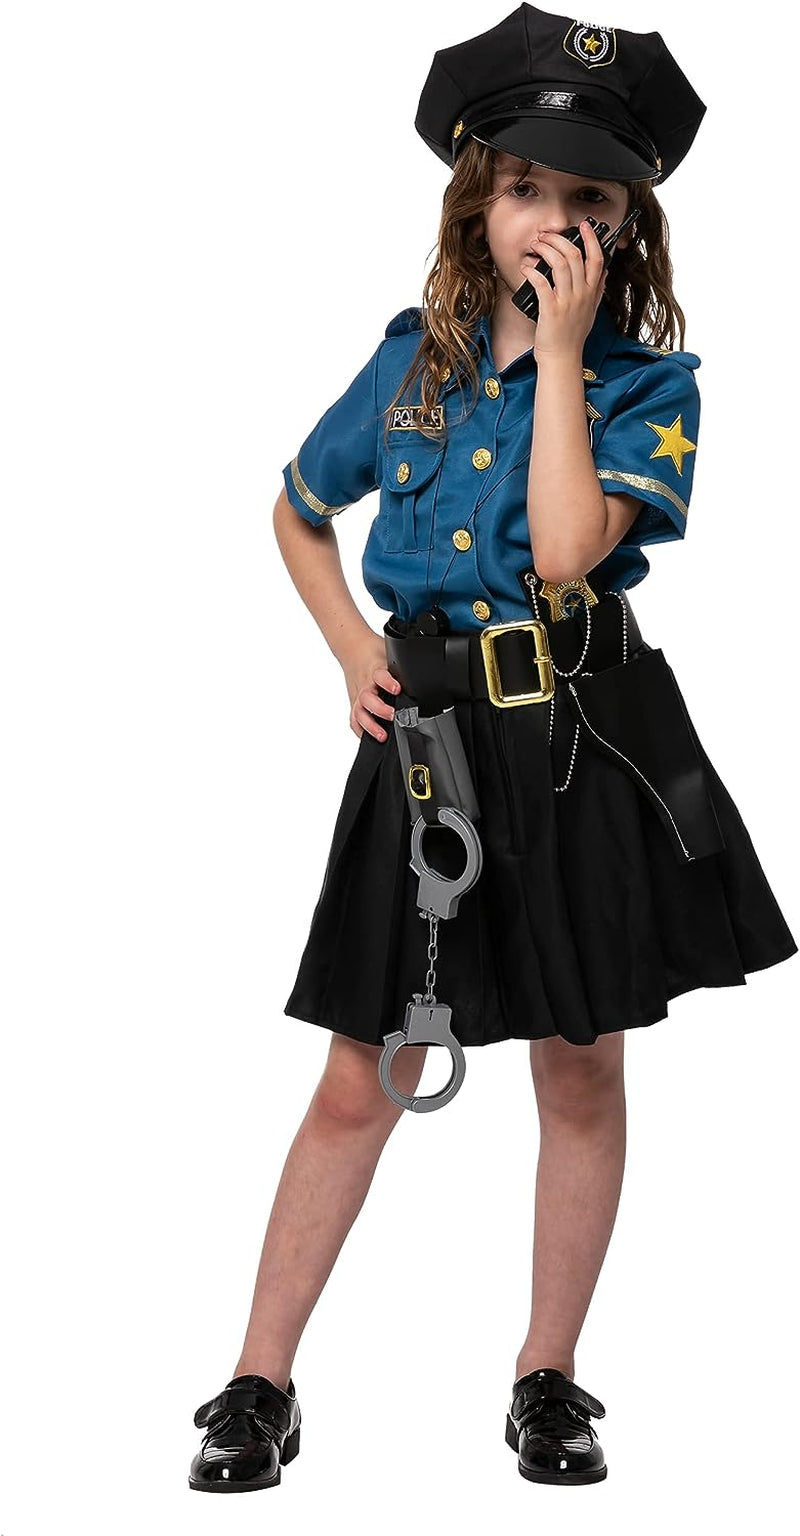 Spooktacular Creations Police Officer Costume for Kids in Light Blue Colour for Girls 3T to L  Spooktacular Creations   